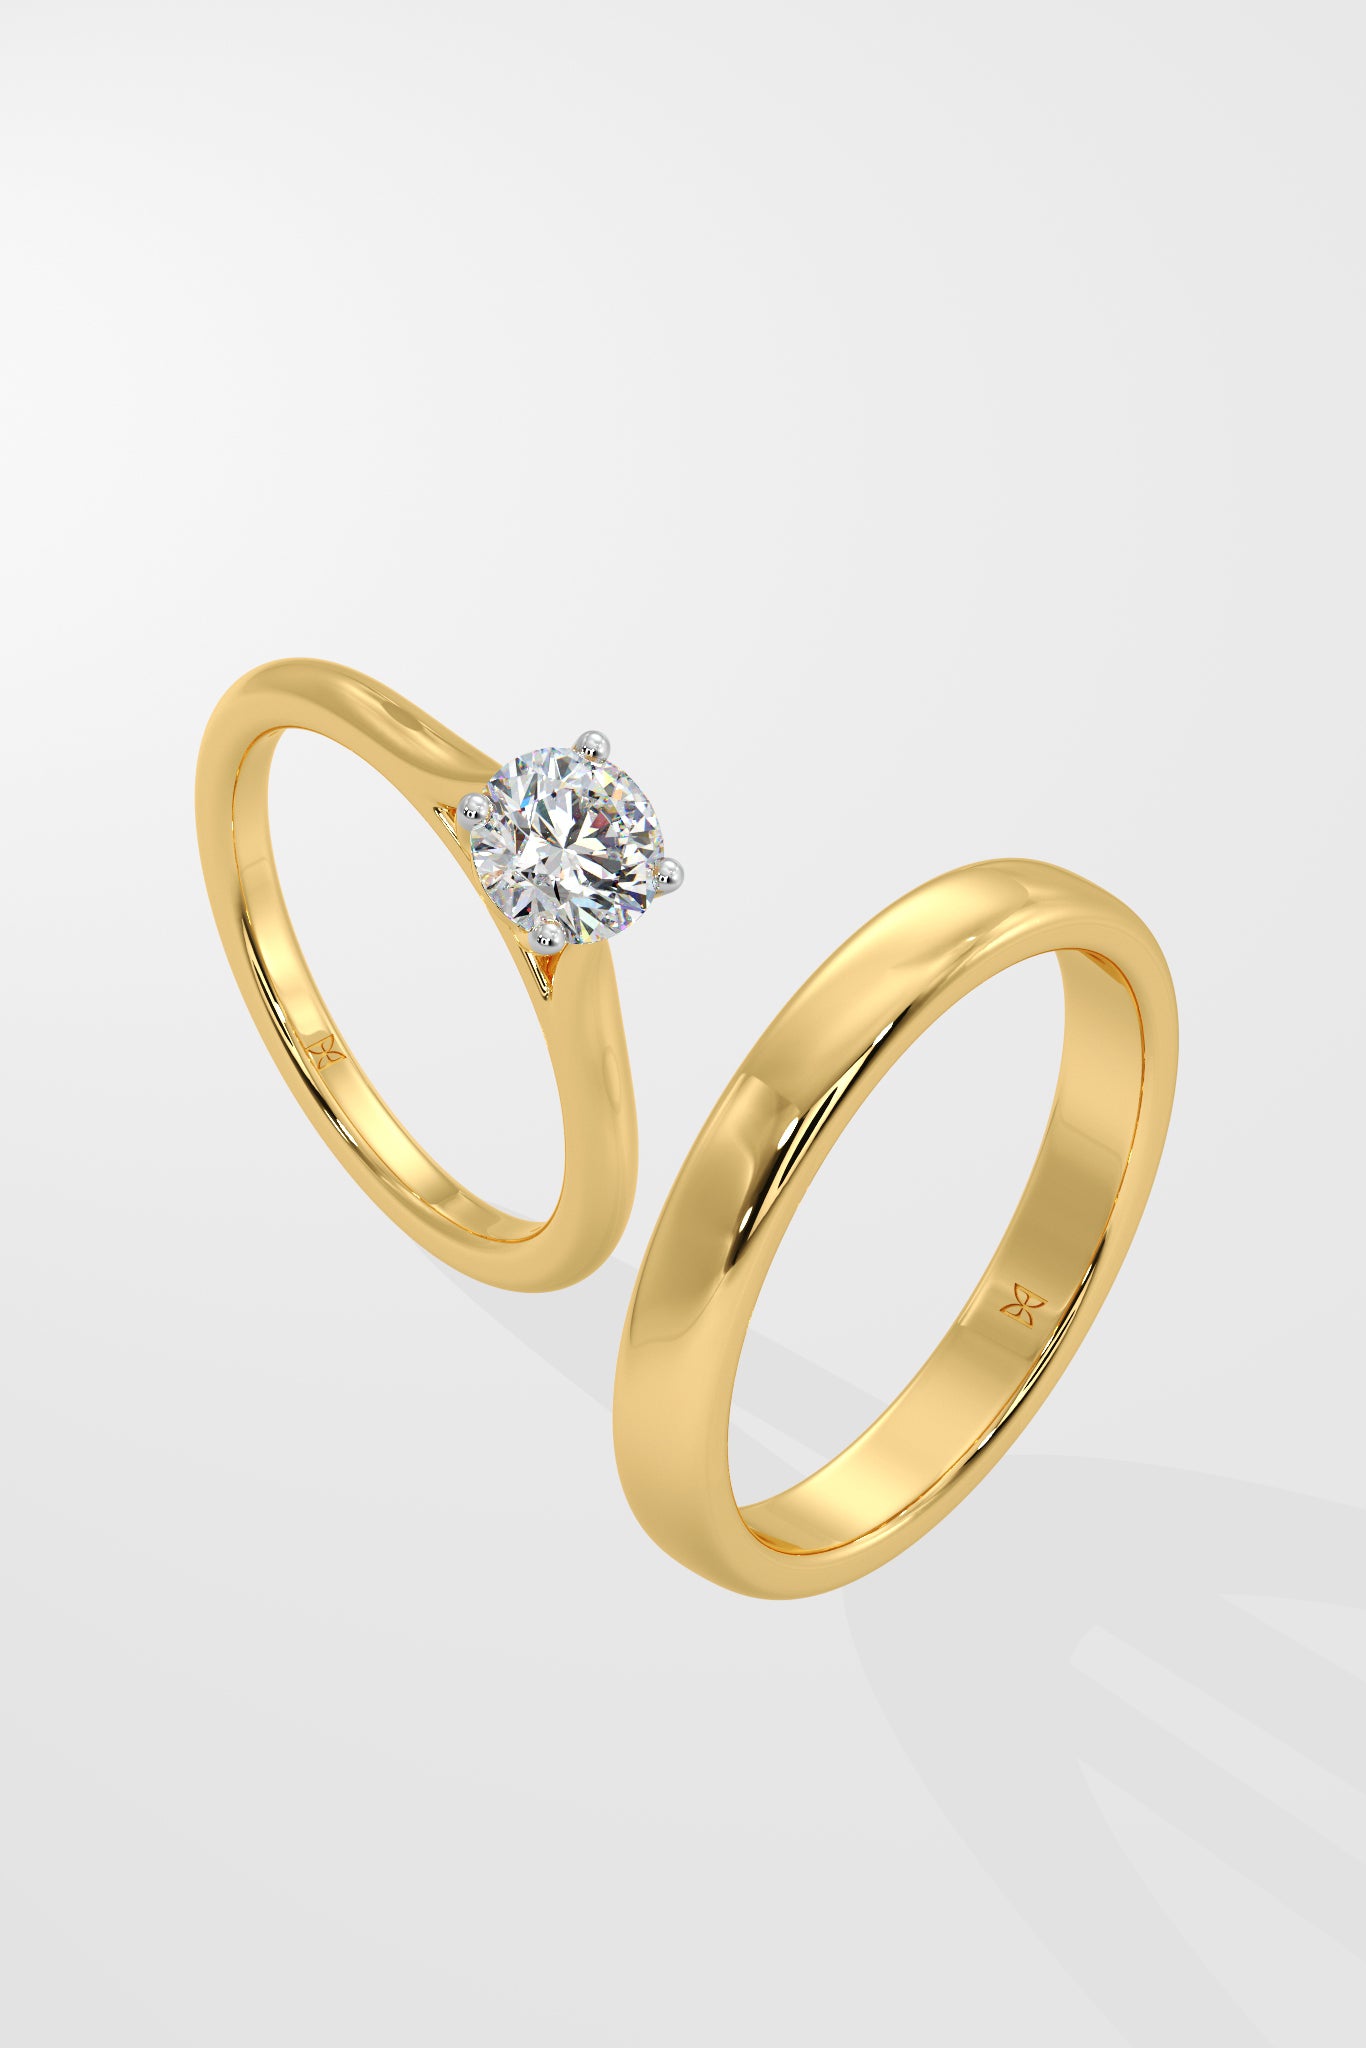 2k+ Rings - Gold & Diamond Ring Designs for Men & Women - Candere by Kalyan  Jewellers